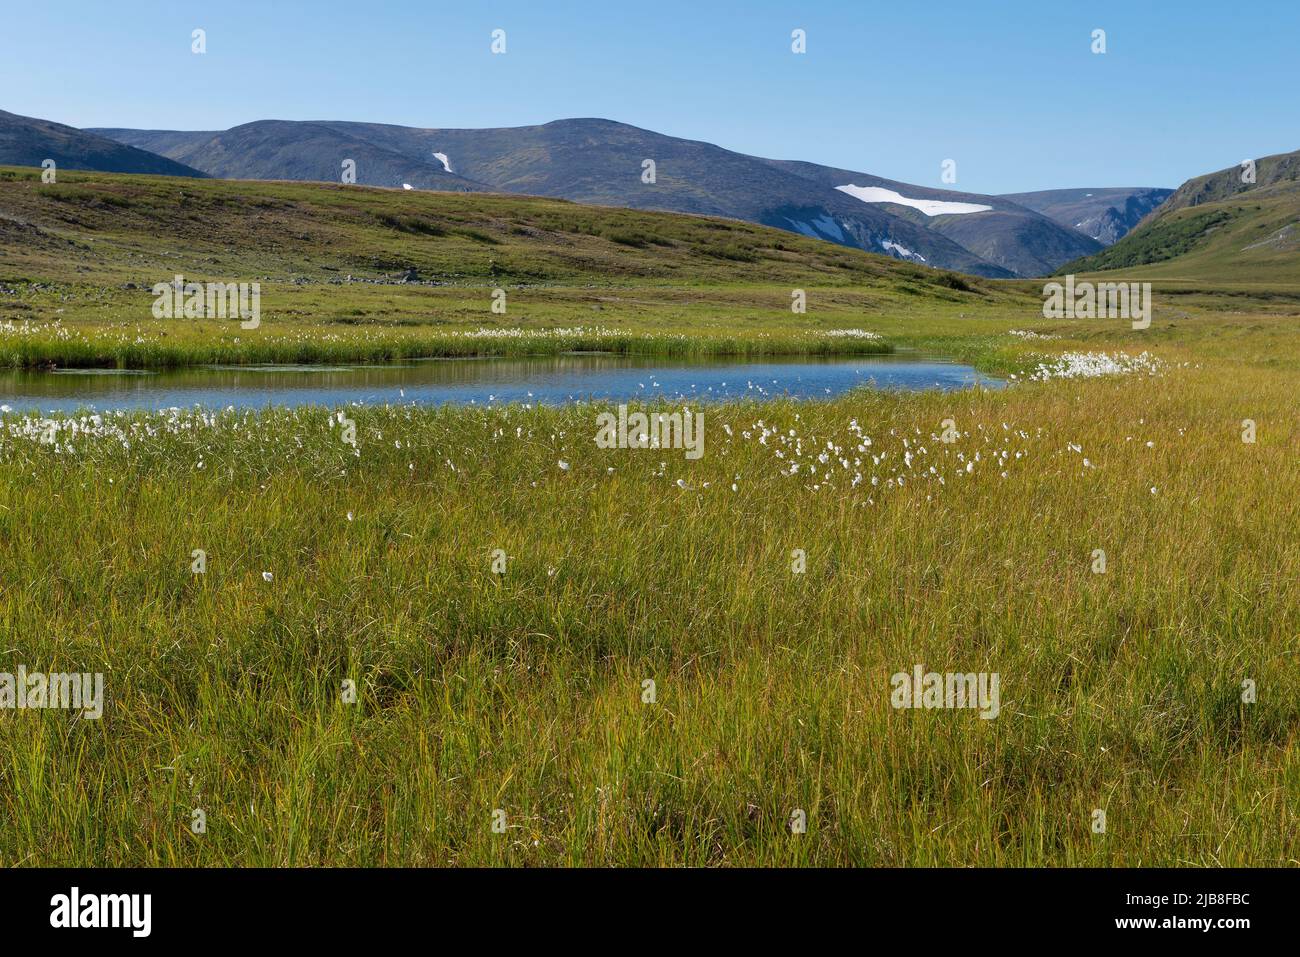 Sunny August day in the foothills of the Polar Urals. Yamalo-Nenets Autonomous Okrug, Russia Stock Photo